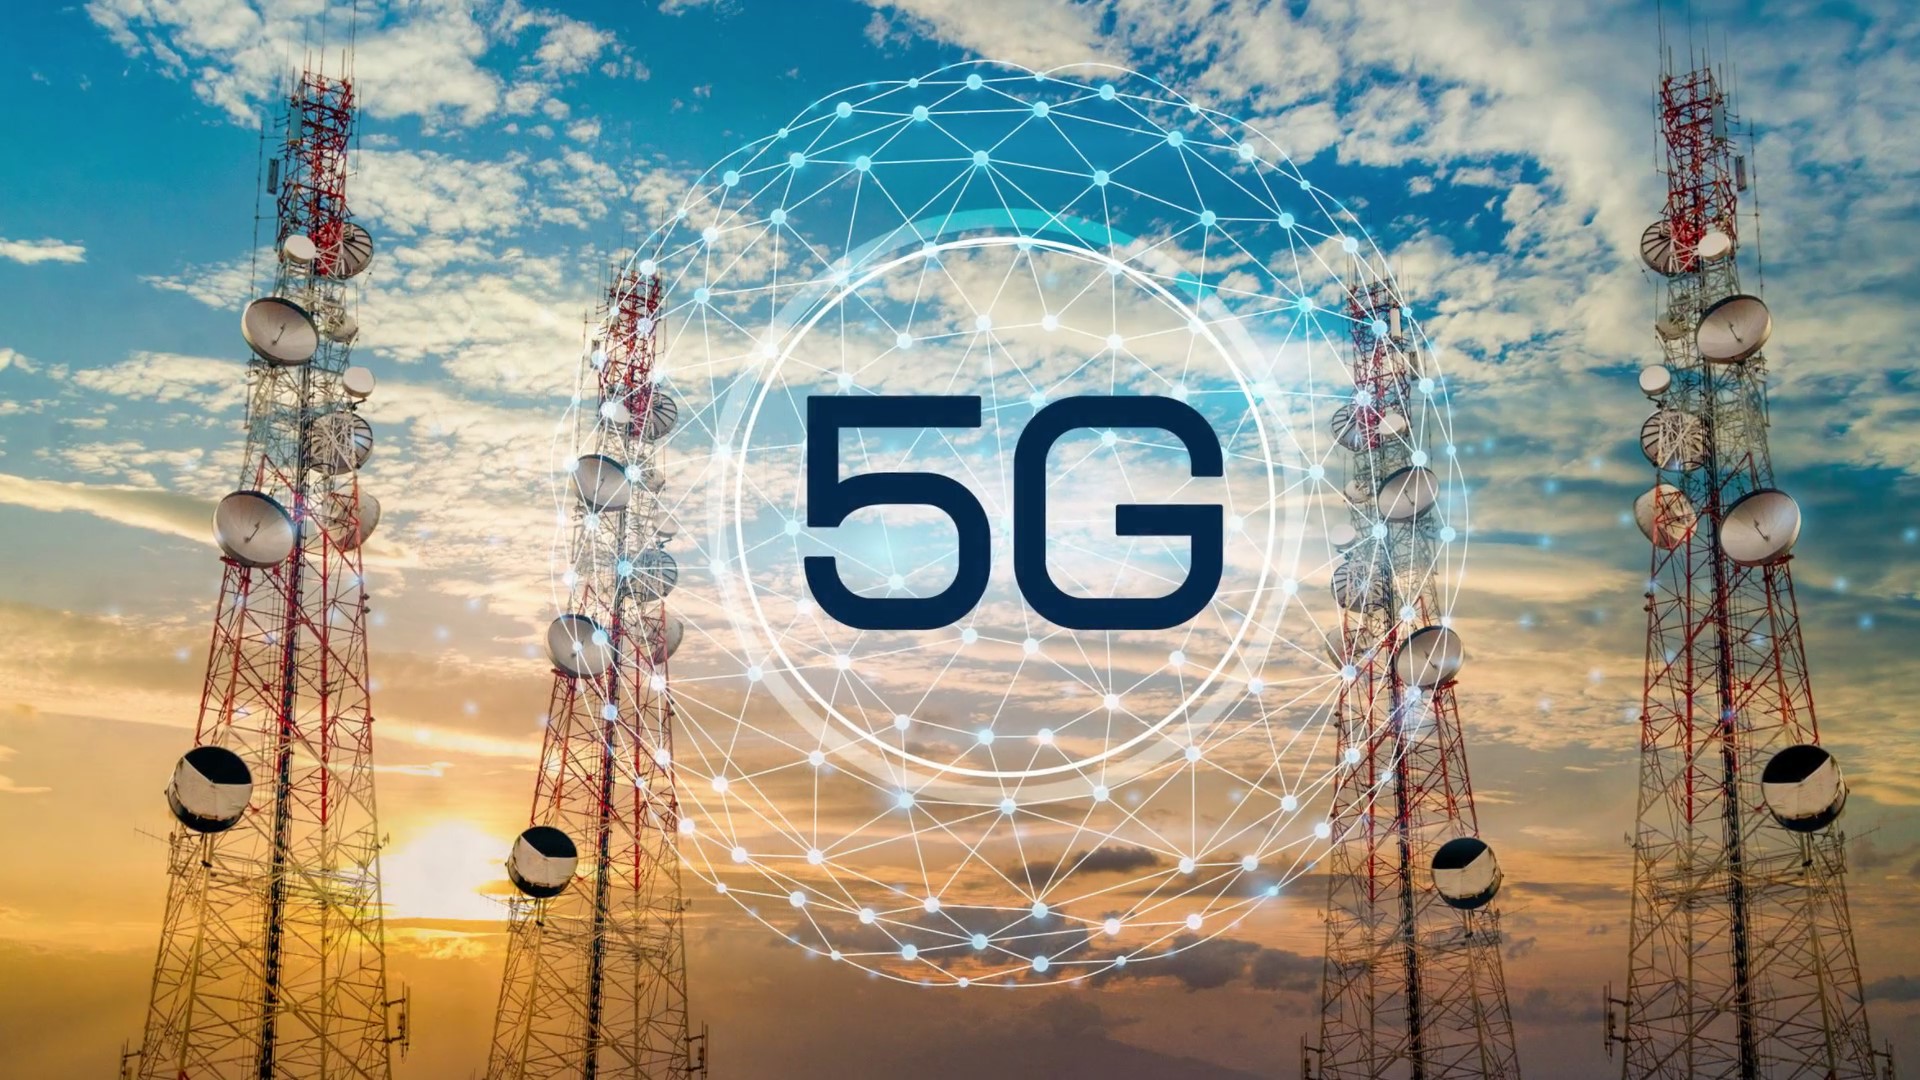 Exploring 5G new use cases: 5G antennas and 5G mmwave usher a new era of connectivity